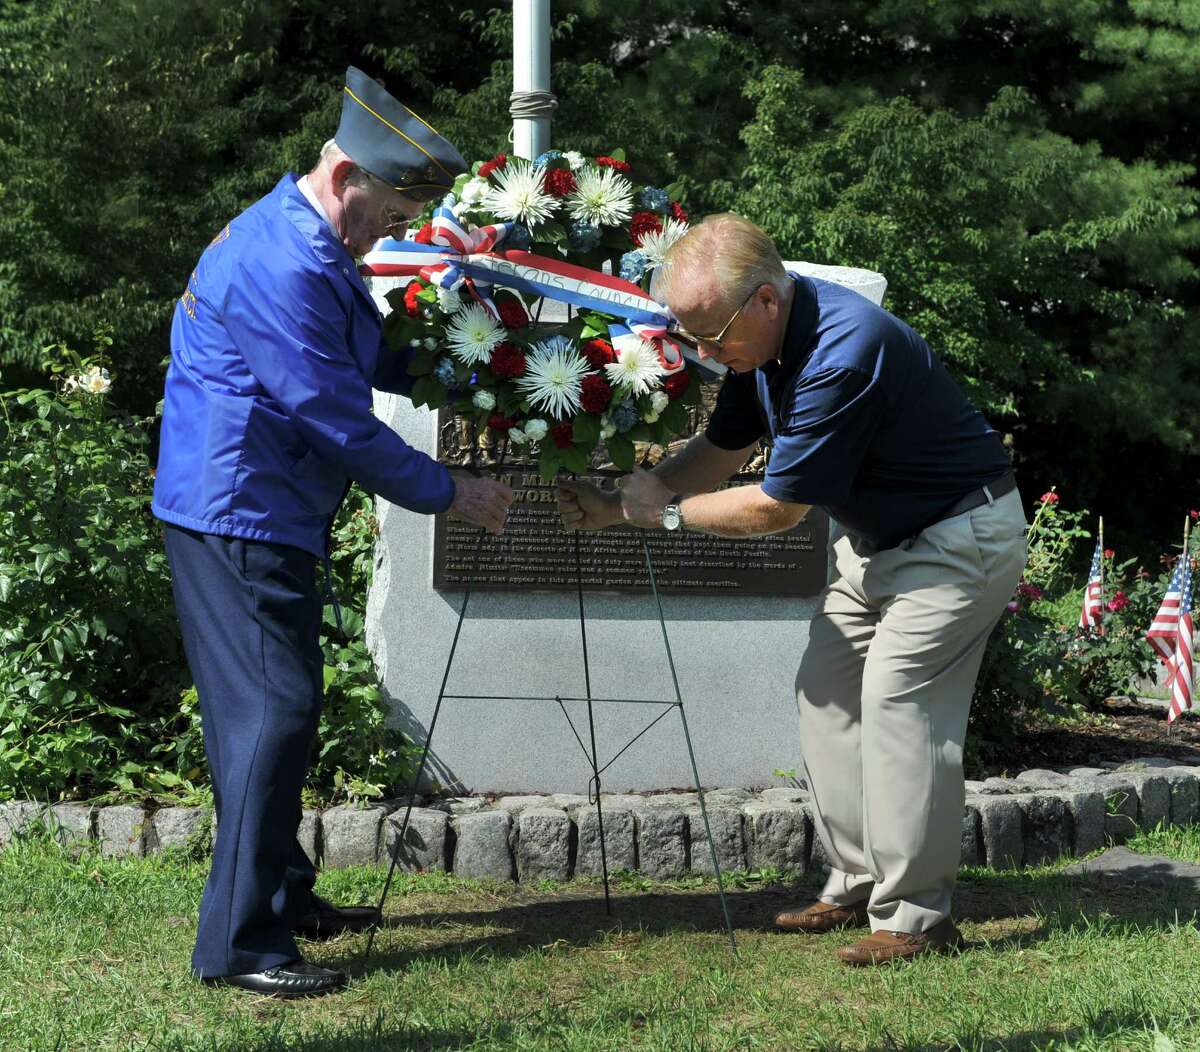 John Edmond, left, 90, of Danbury, who served on the U.S. Providence during World War II and Mayor Mark Boughton, place a wreath at the War War II monument Monday morning. A ceremony at the Rogers Park Rose Garden marked the 71 st anniversary of the Japanese surrender and the end of World War II, Monday, August 15, 2016 in Danbury.